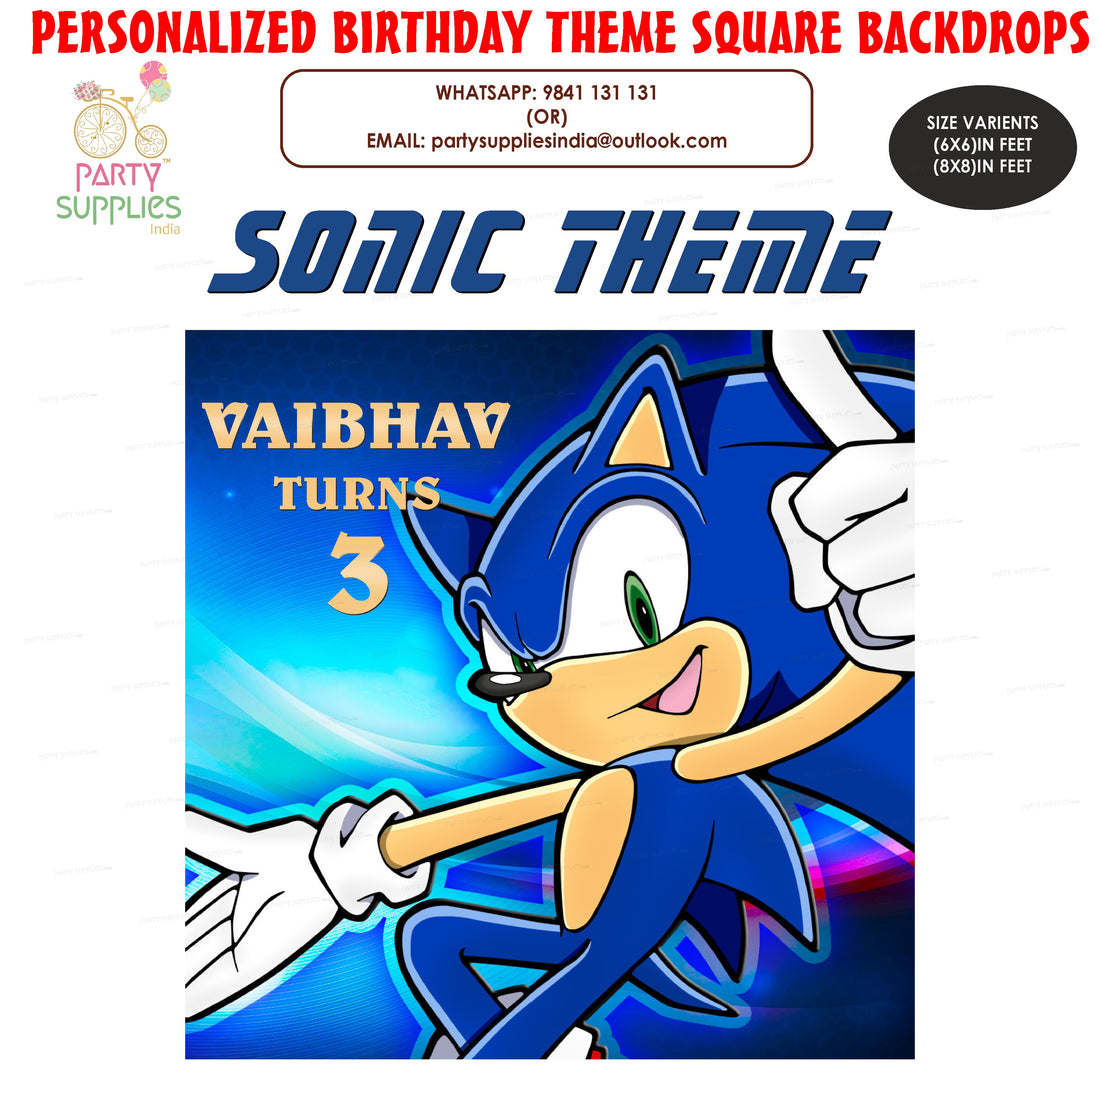 PSI Sonic the Hedgehog Theme Classic Square Backdrop